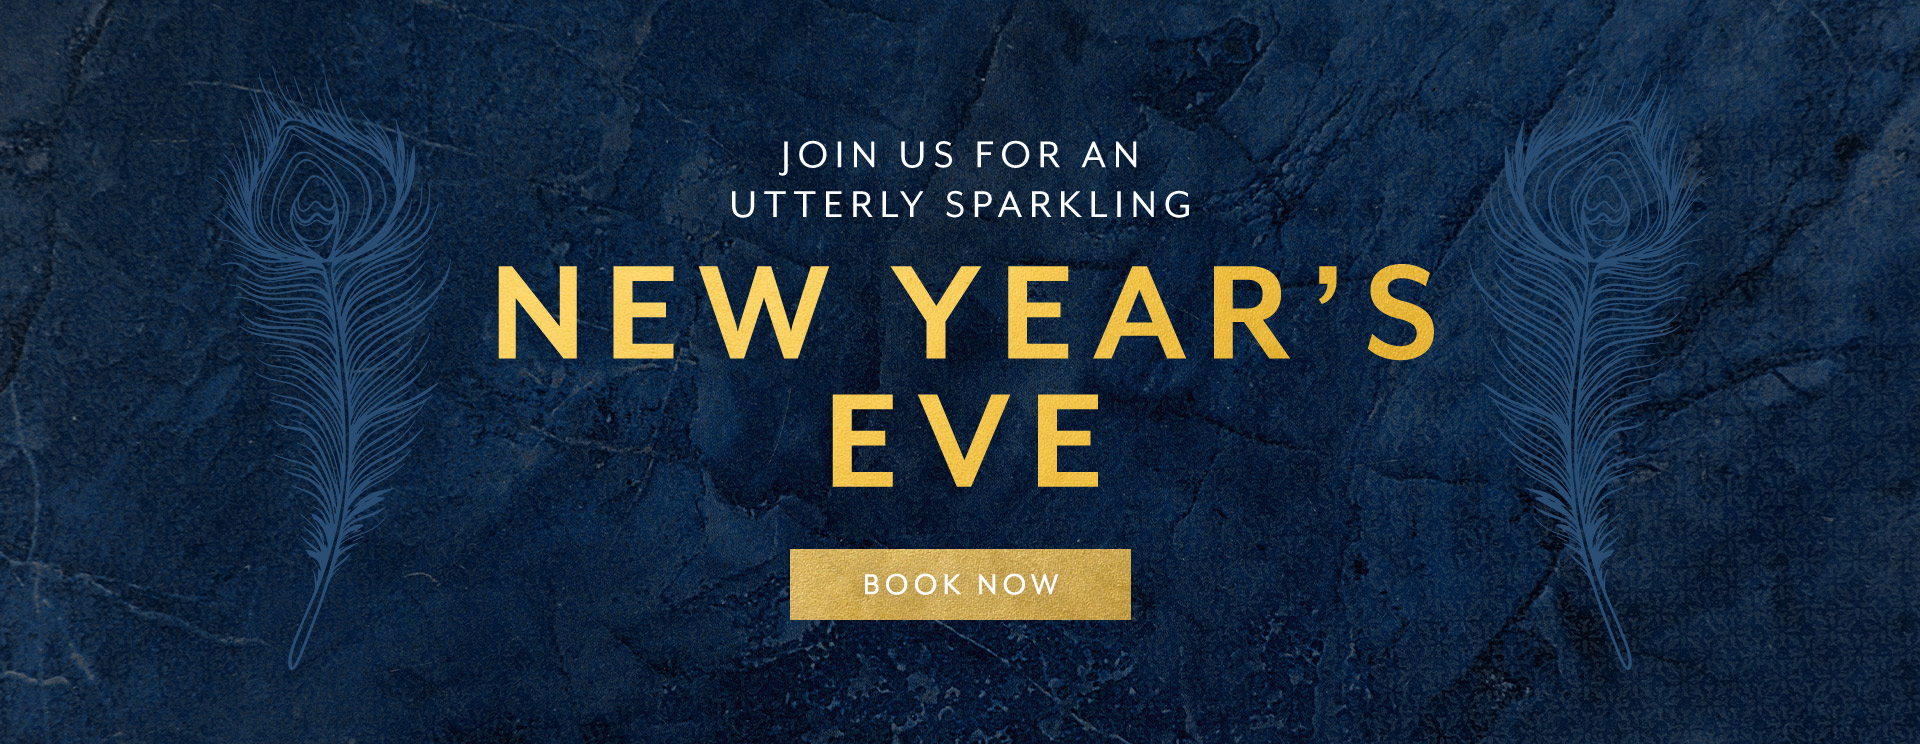 New Year's Eve at The Green Man